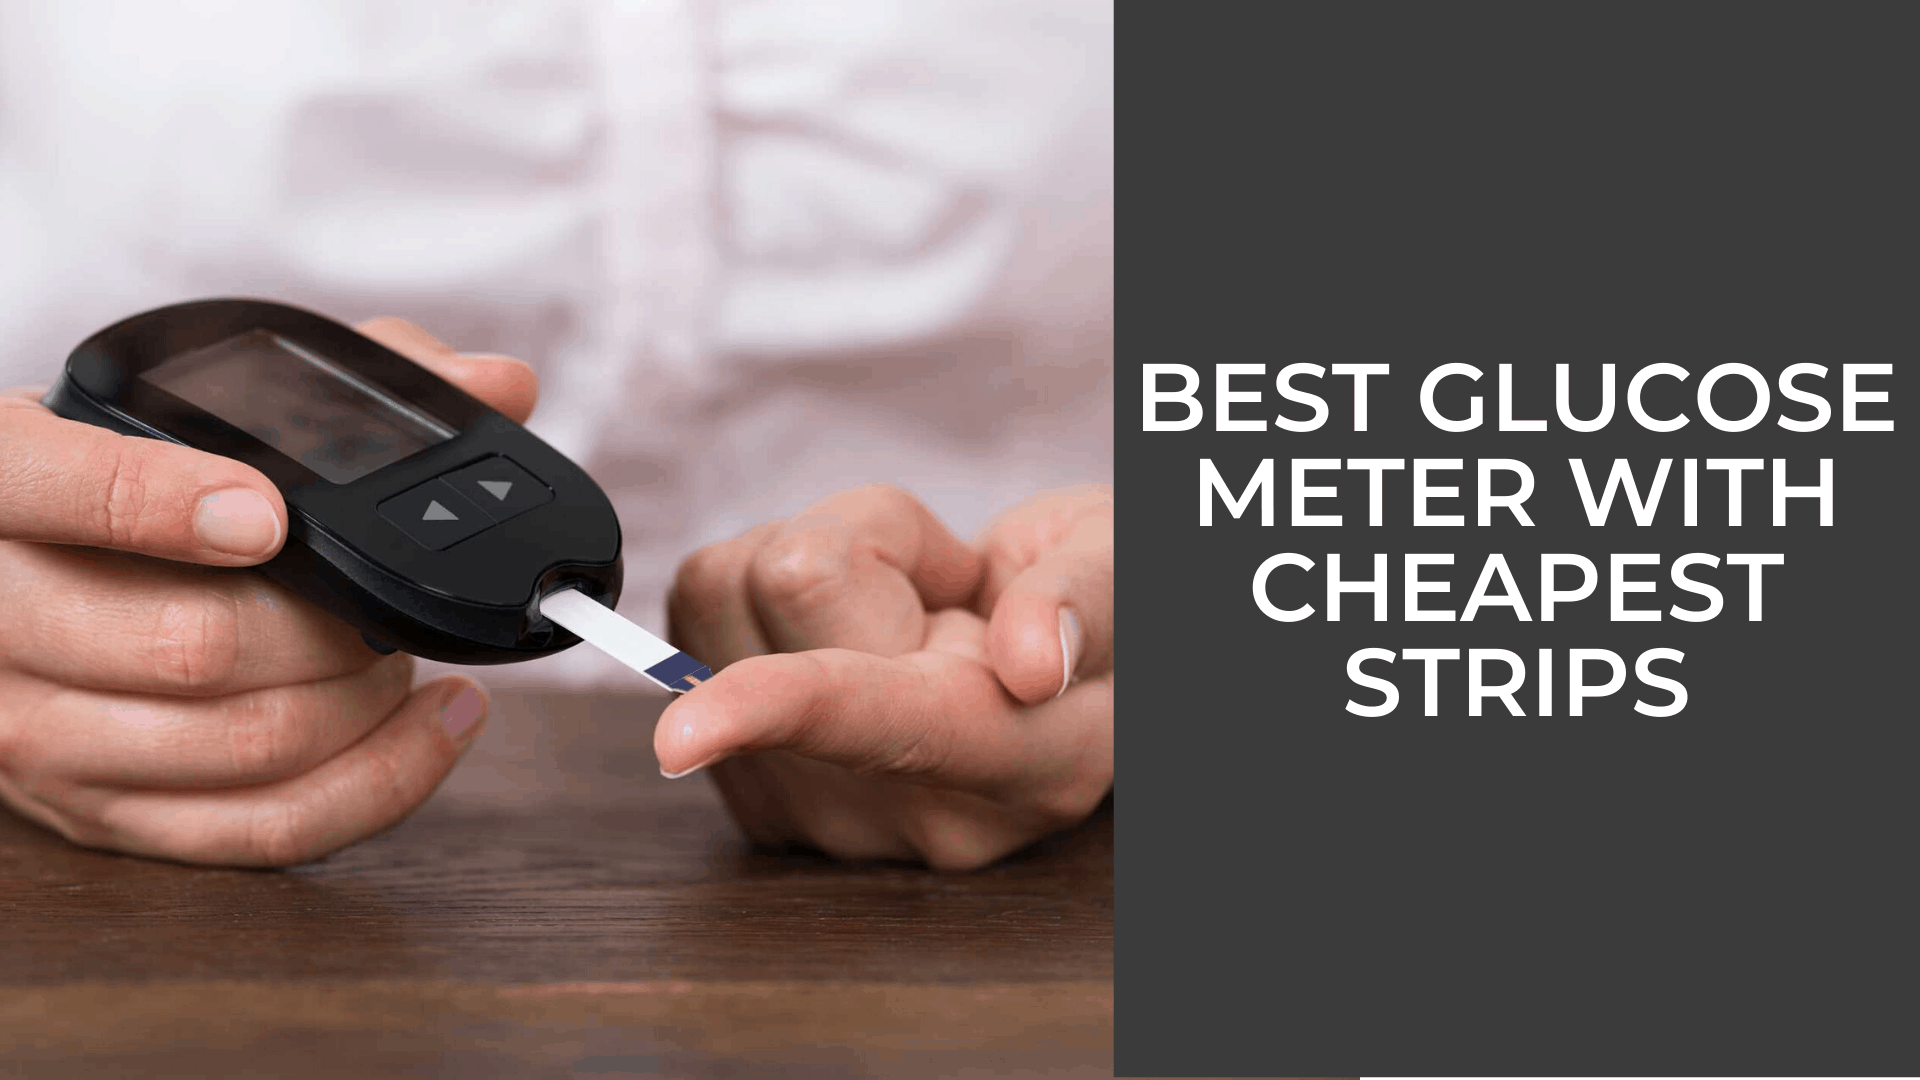 Best Glucose Meter With Cheapest Strips